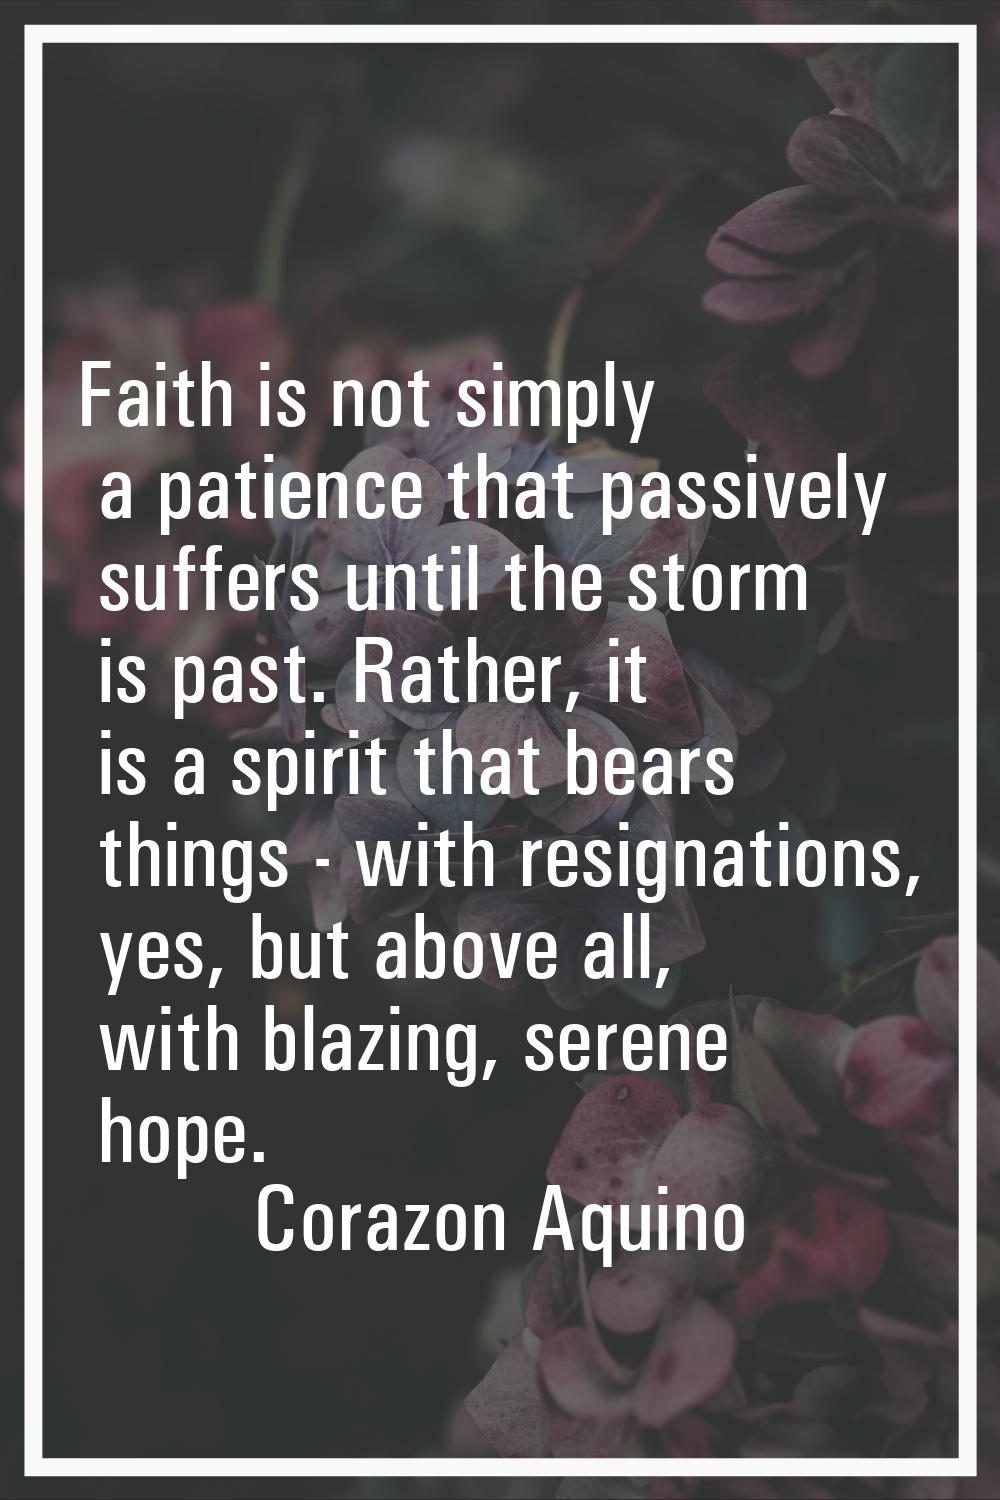 Faith is not simply a patience that passively suffers until the storm is past. Rather, it is a spir